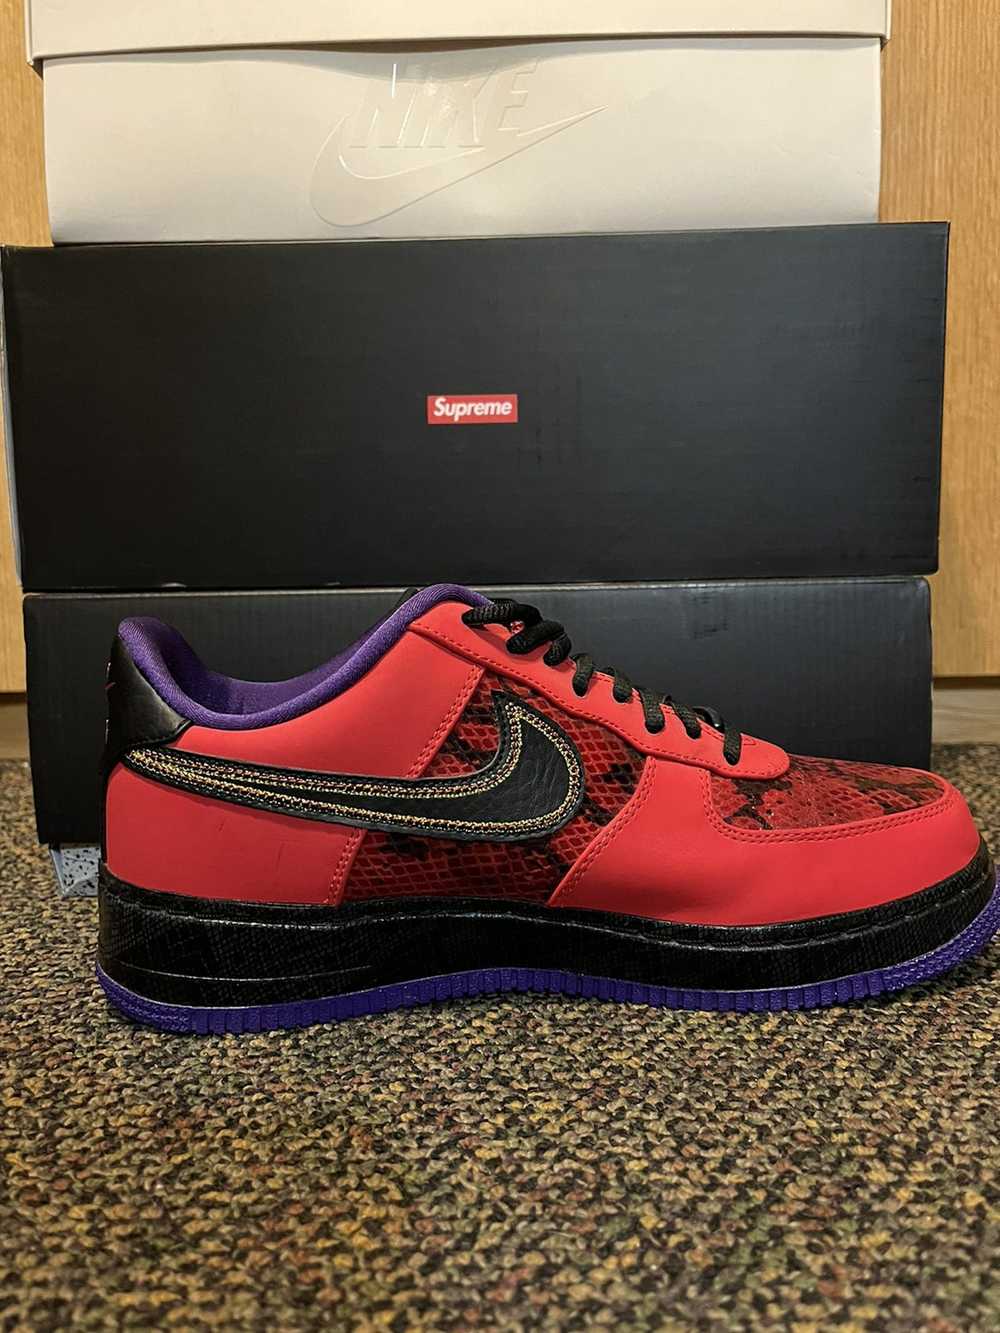 Nike 2013 Year of the Snake AF1 low - image 6